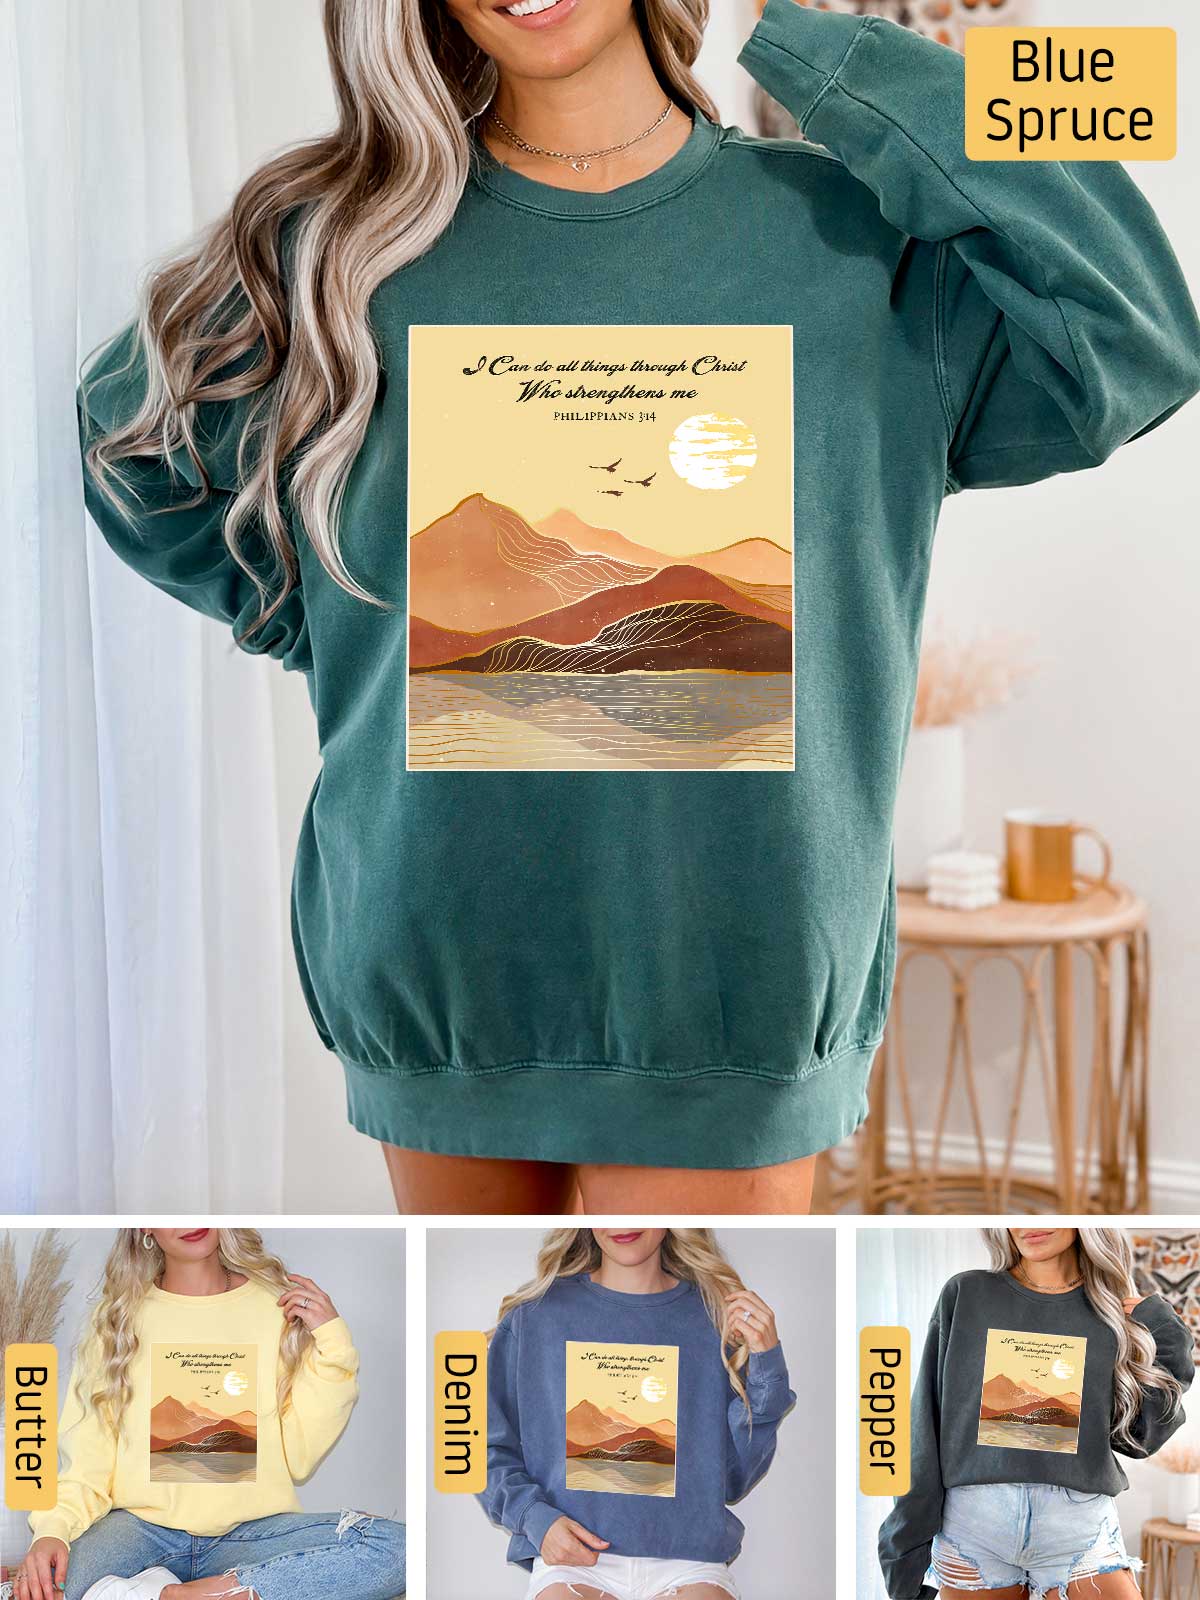 a woman wearing a sweatshirt with a quote on it